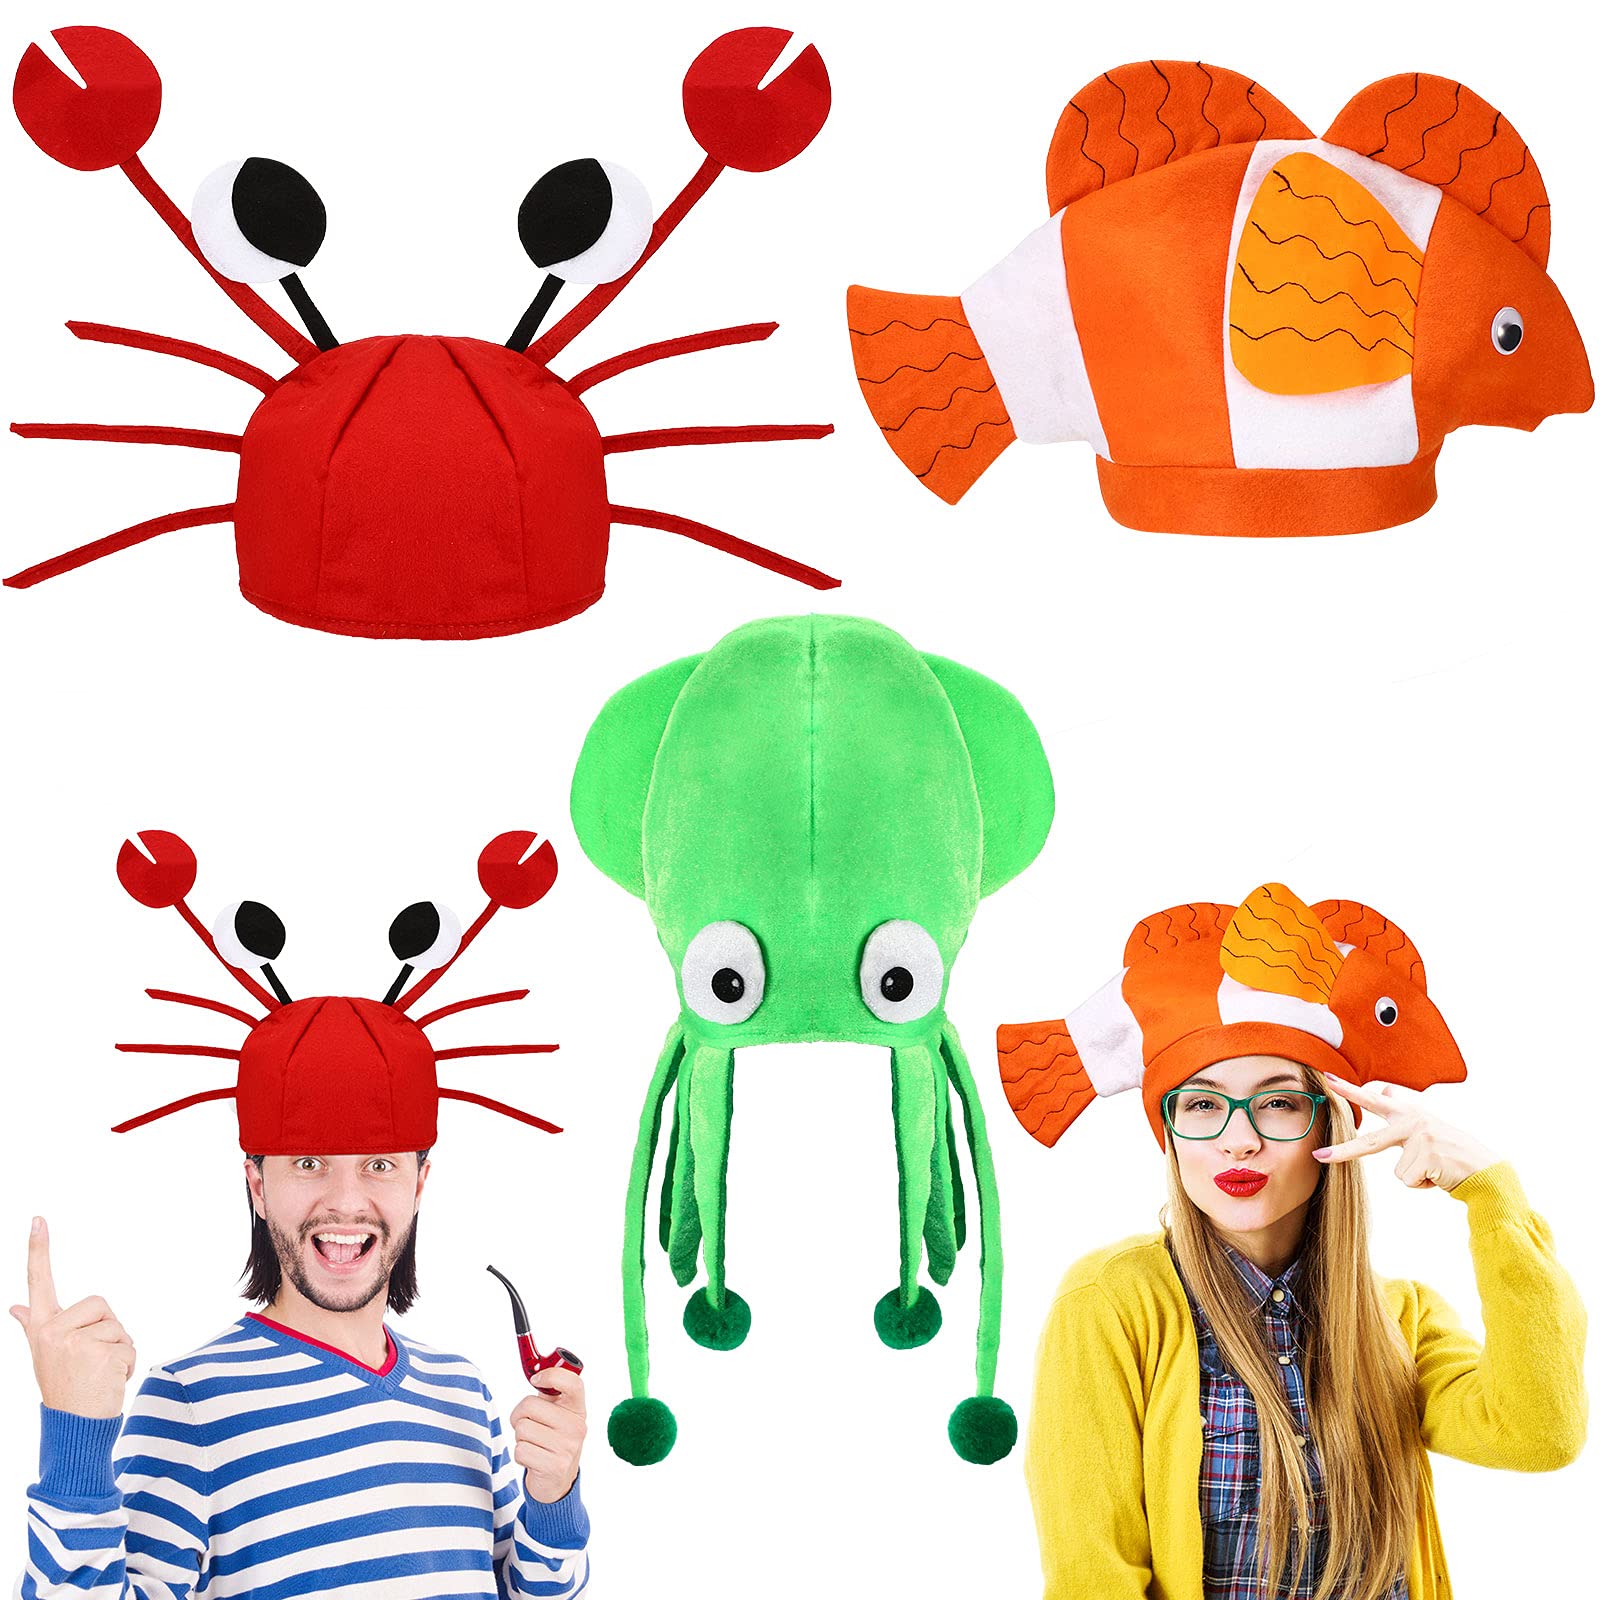 Kasyat 3 Pcs Party Octopus Hats Funny Ocean Sea Animal Hats Halloween Hat Crazy Costume Hats for Photo Booth Cosplay Party